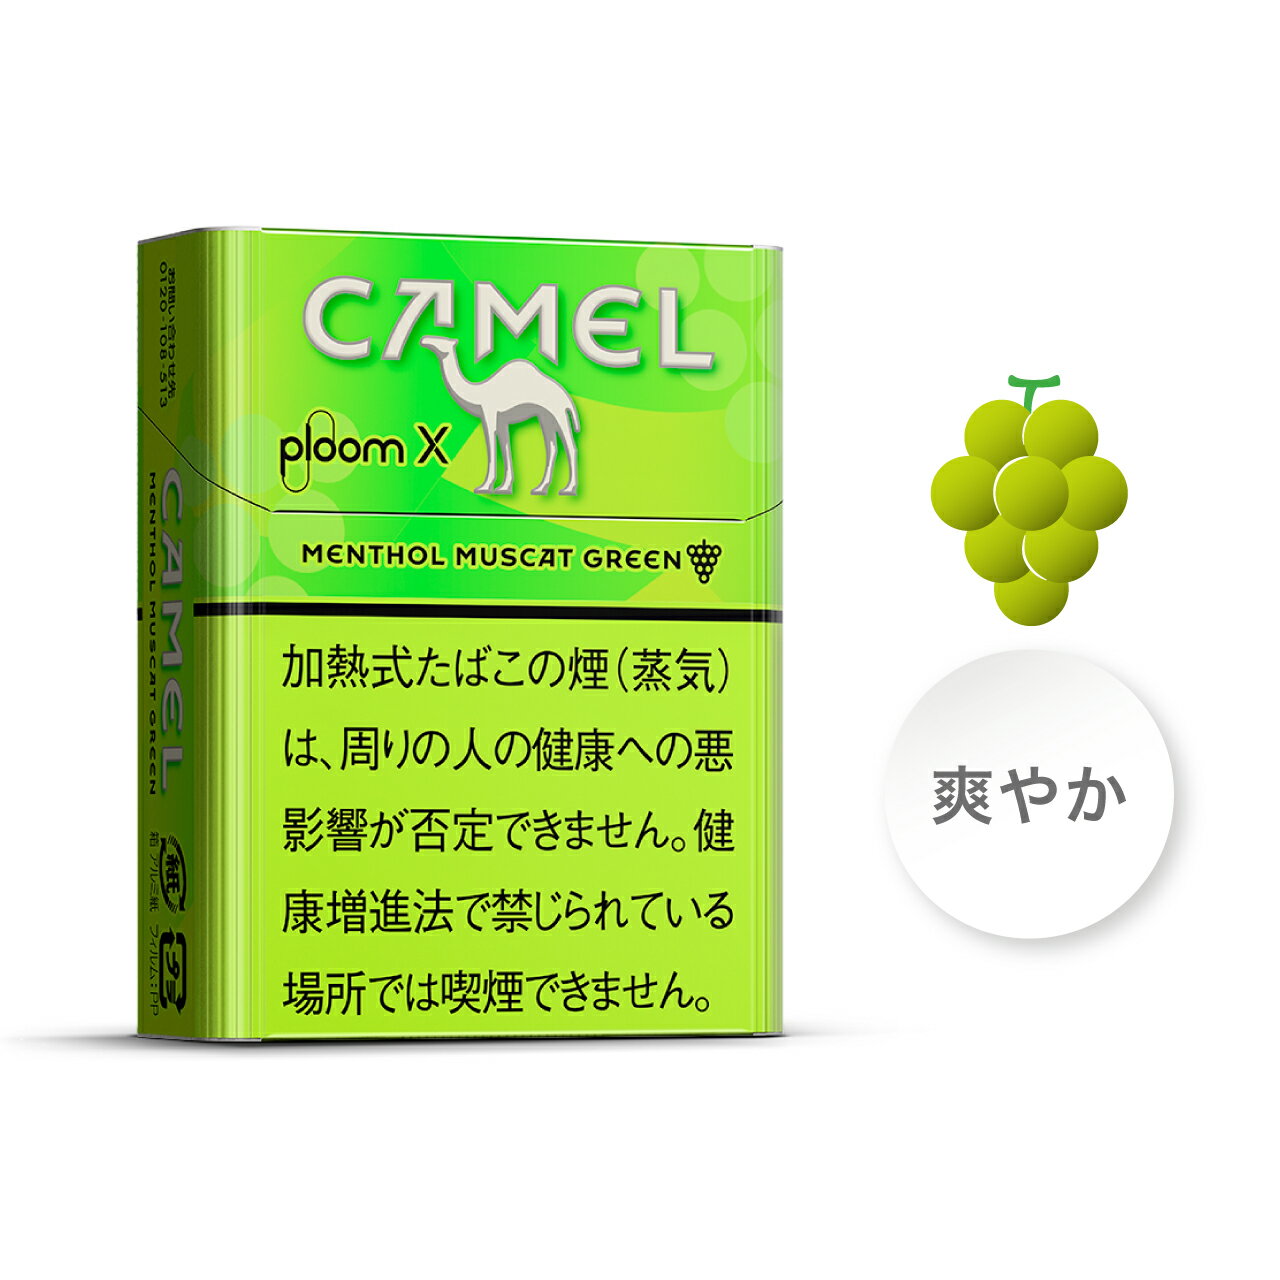 international delivery available 100Sticks Camel Menthol Muscat Green Ploom X